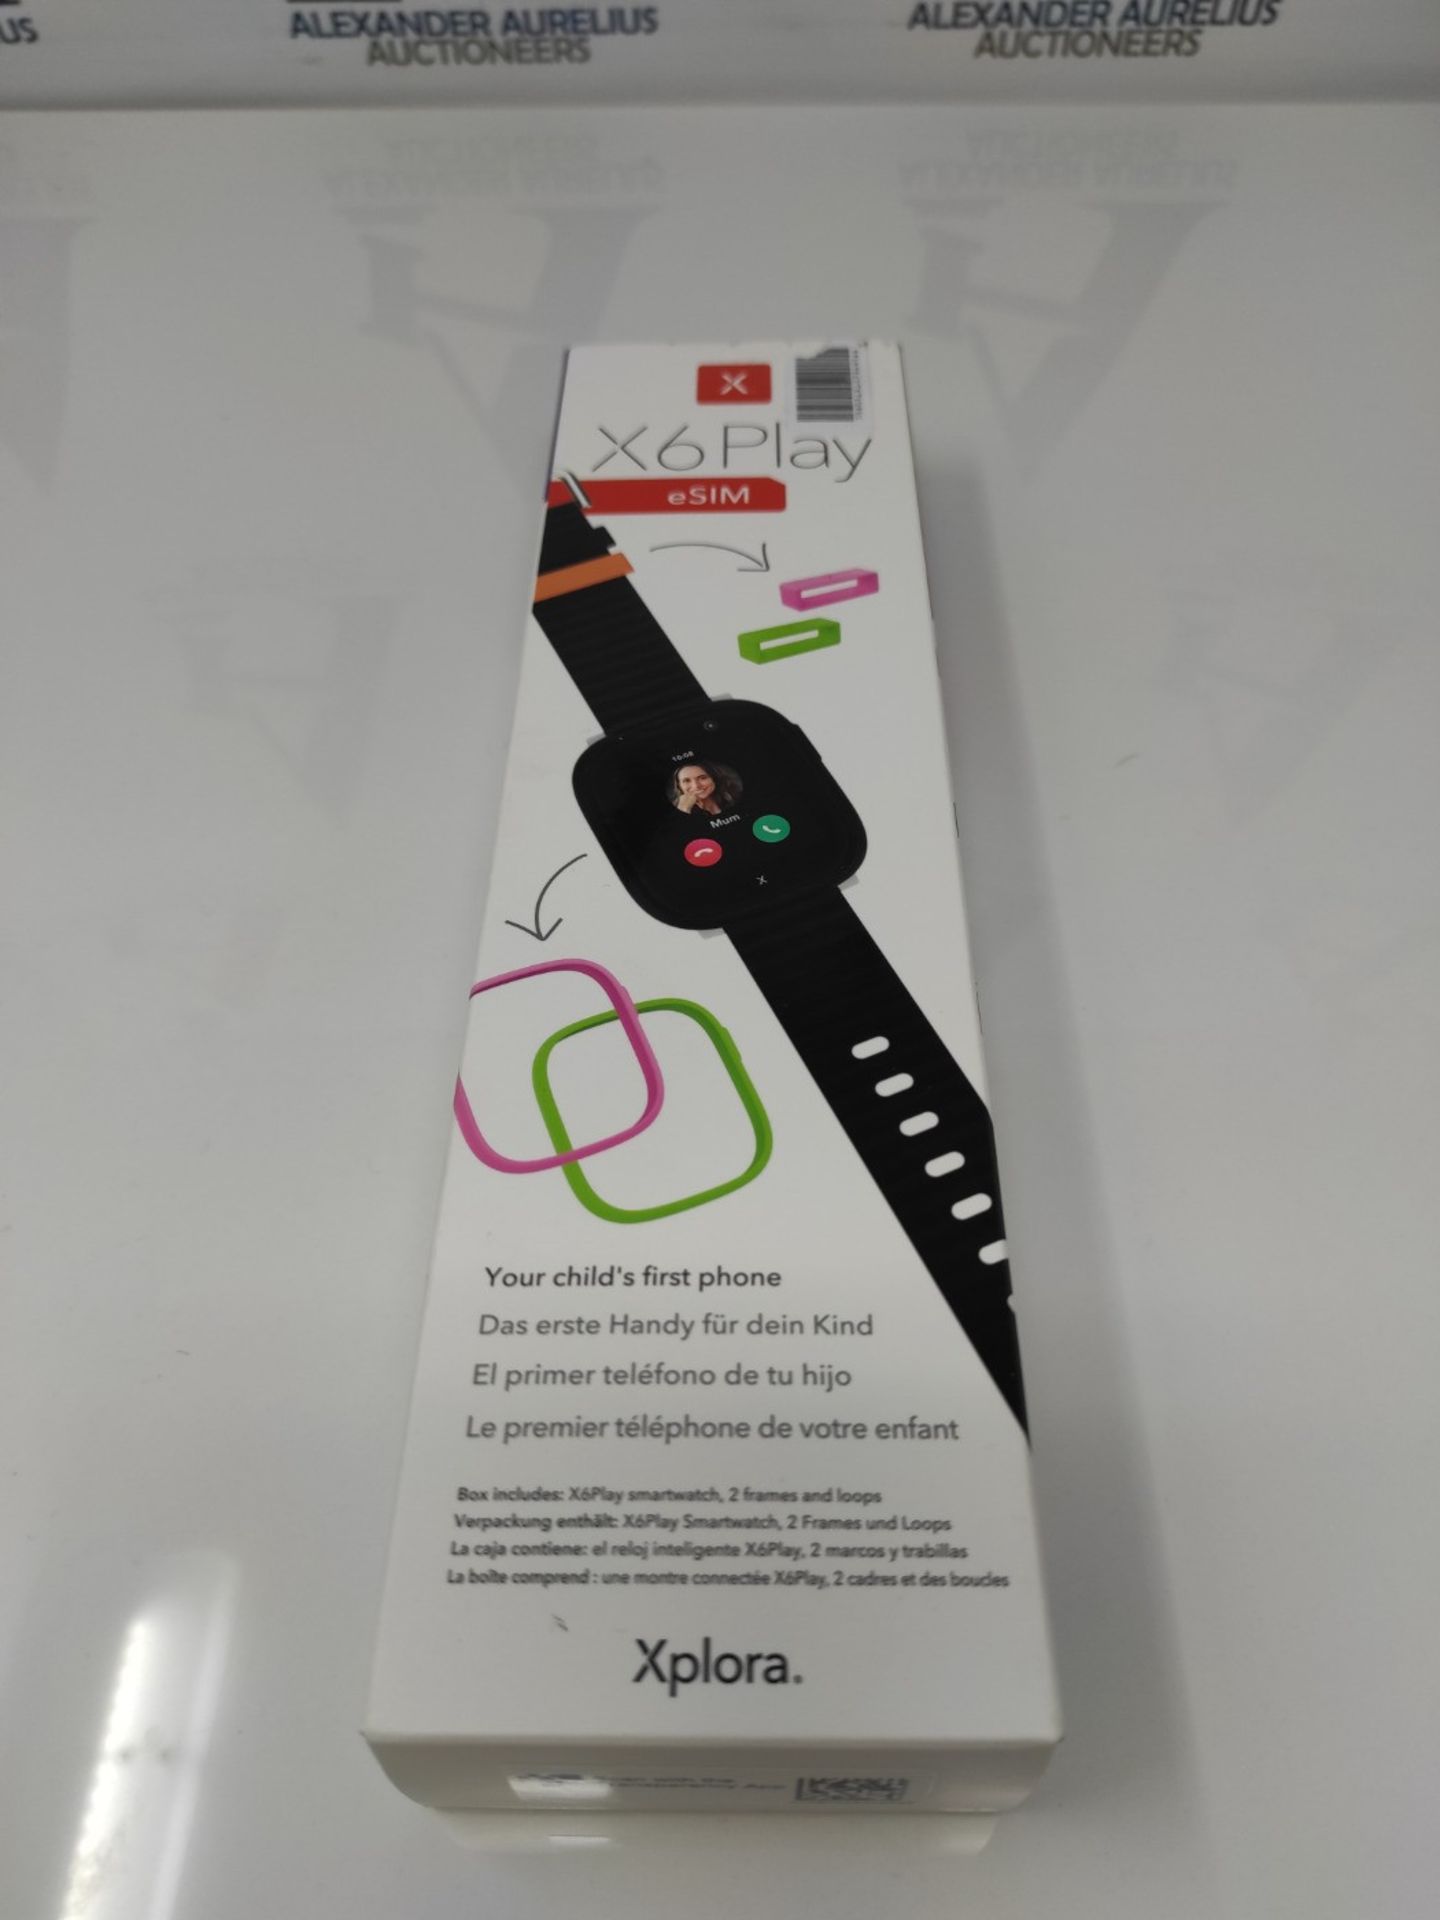 RRP £180.00 Xplora X6 Play eSIM Smartwatch for kids with GPS tracker & SOS button I 30¬ Amazon v - Image 2 of 3